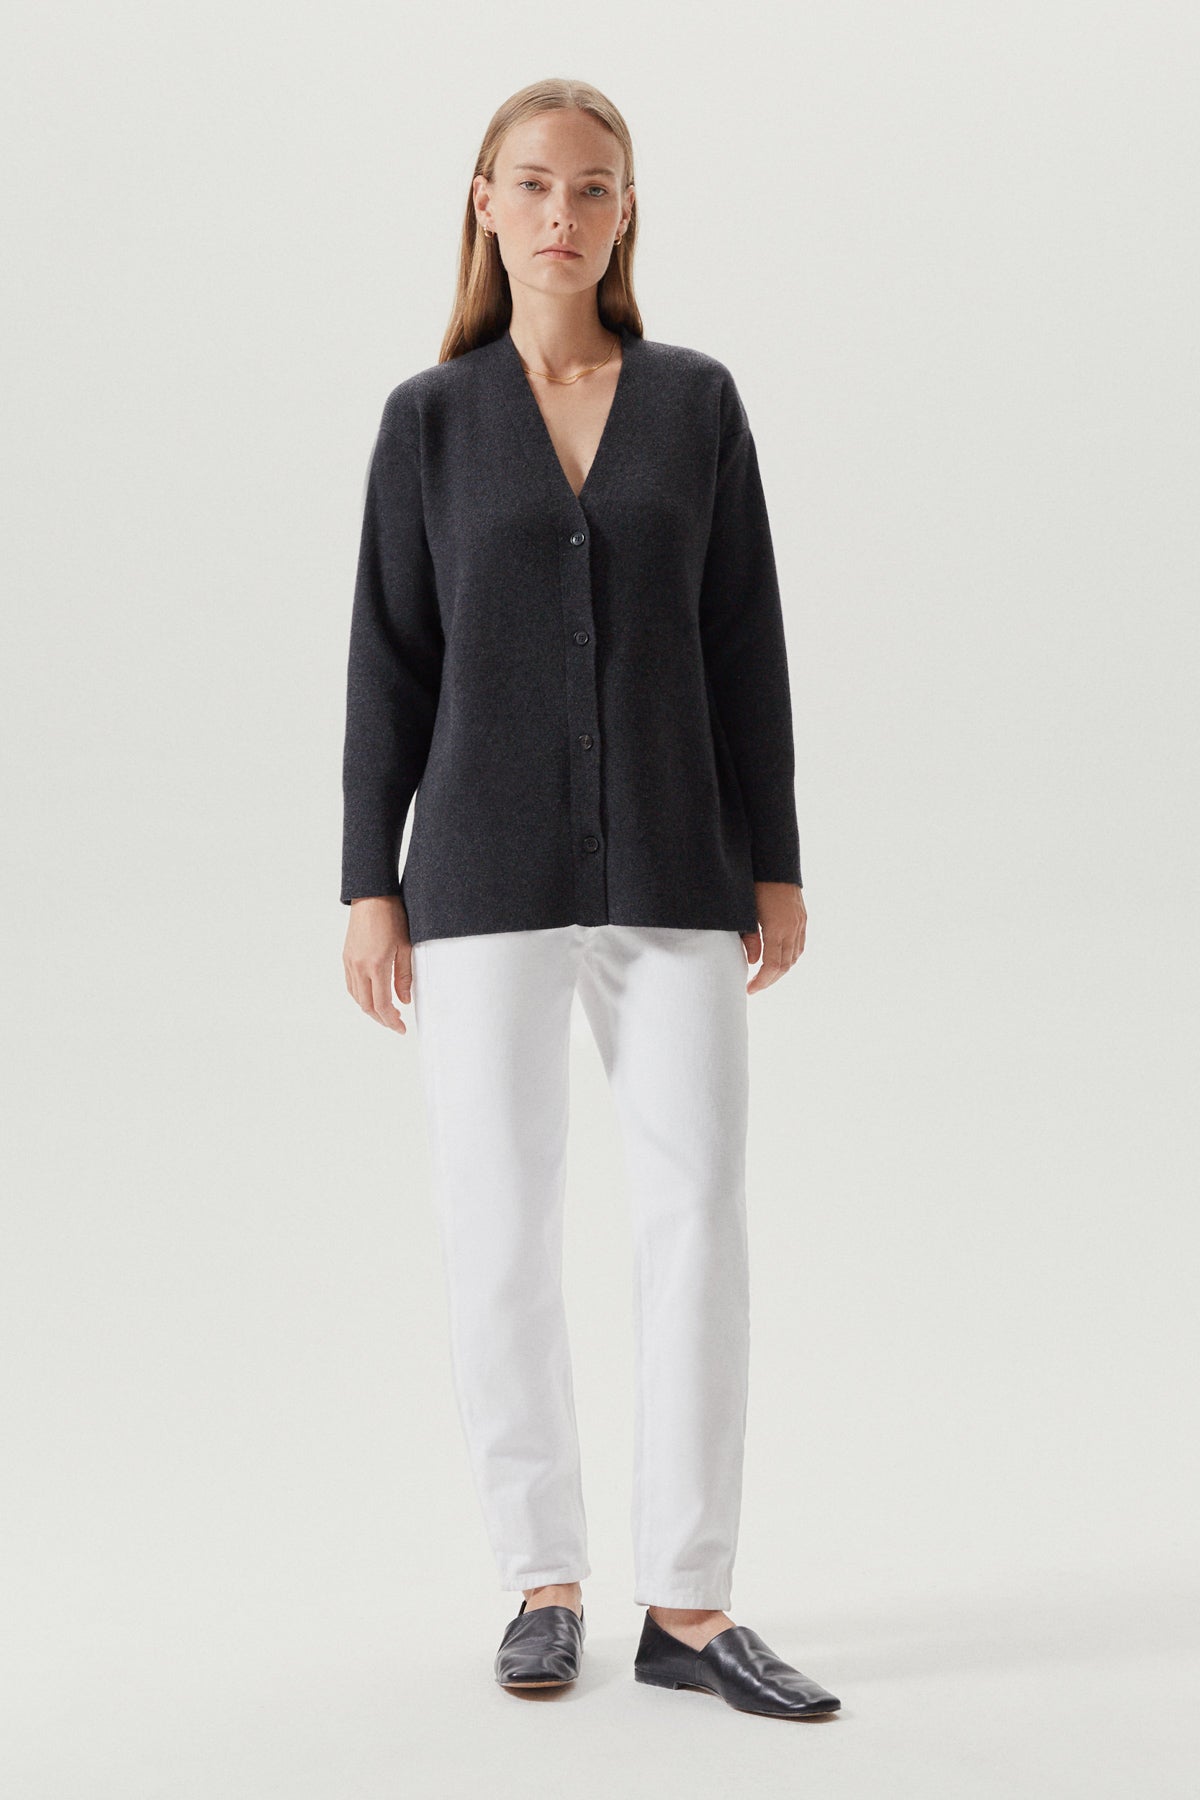 Charcoal Grey | The Superior Cashmere Chunky Cardigan